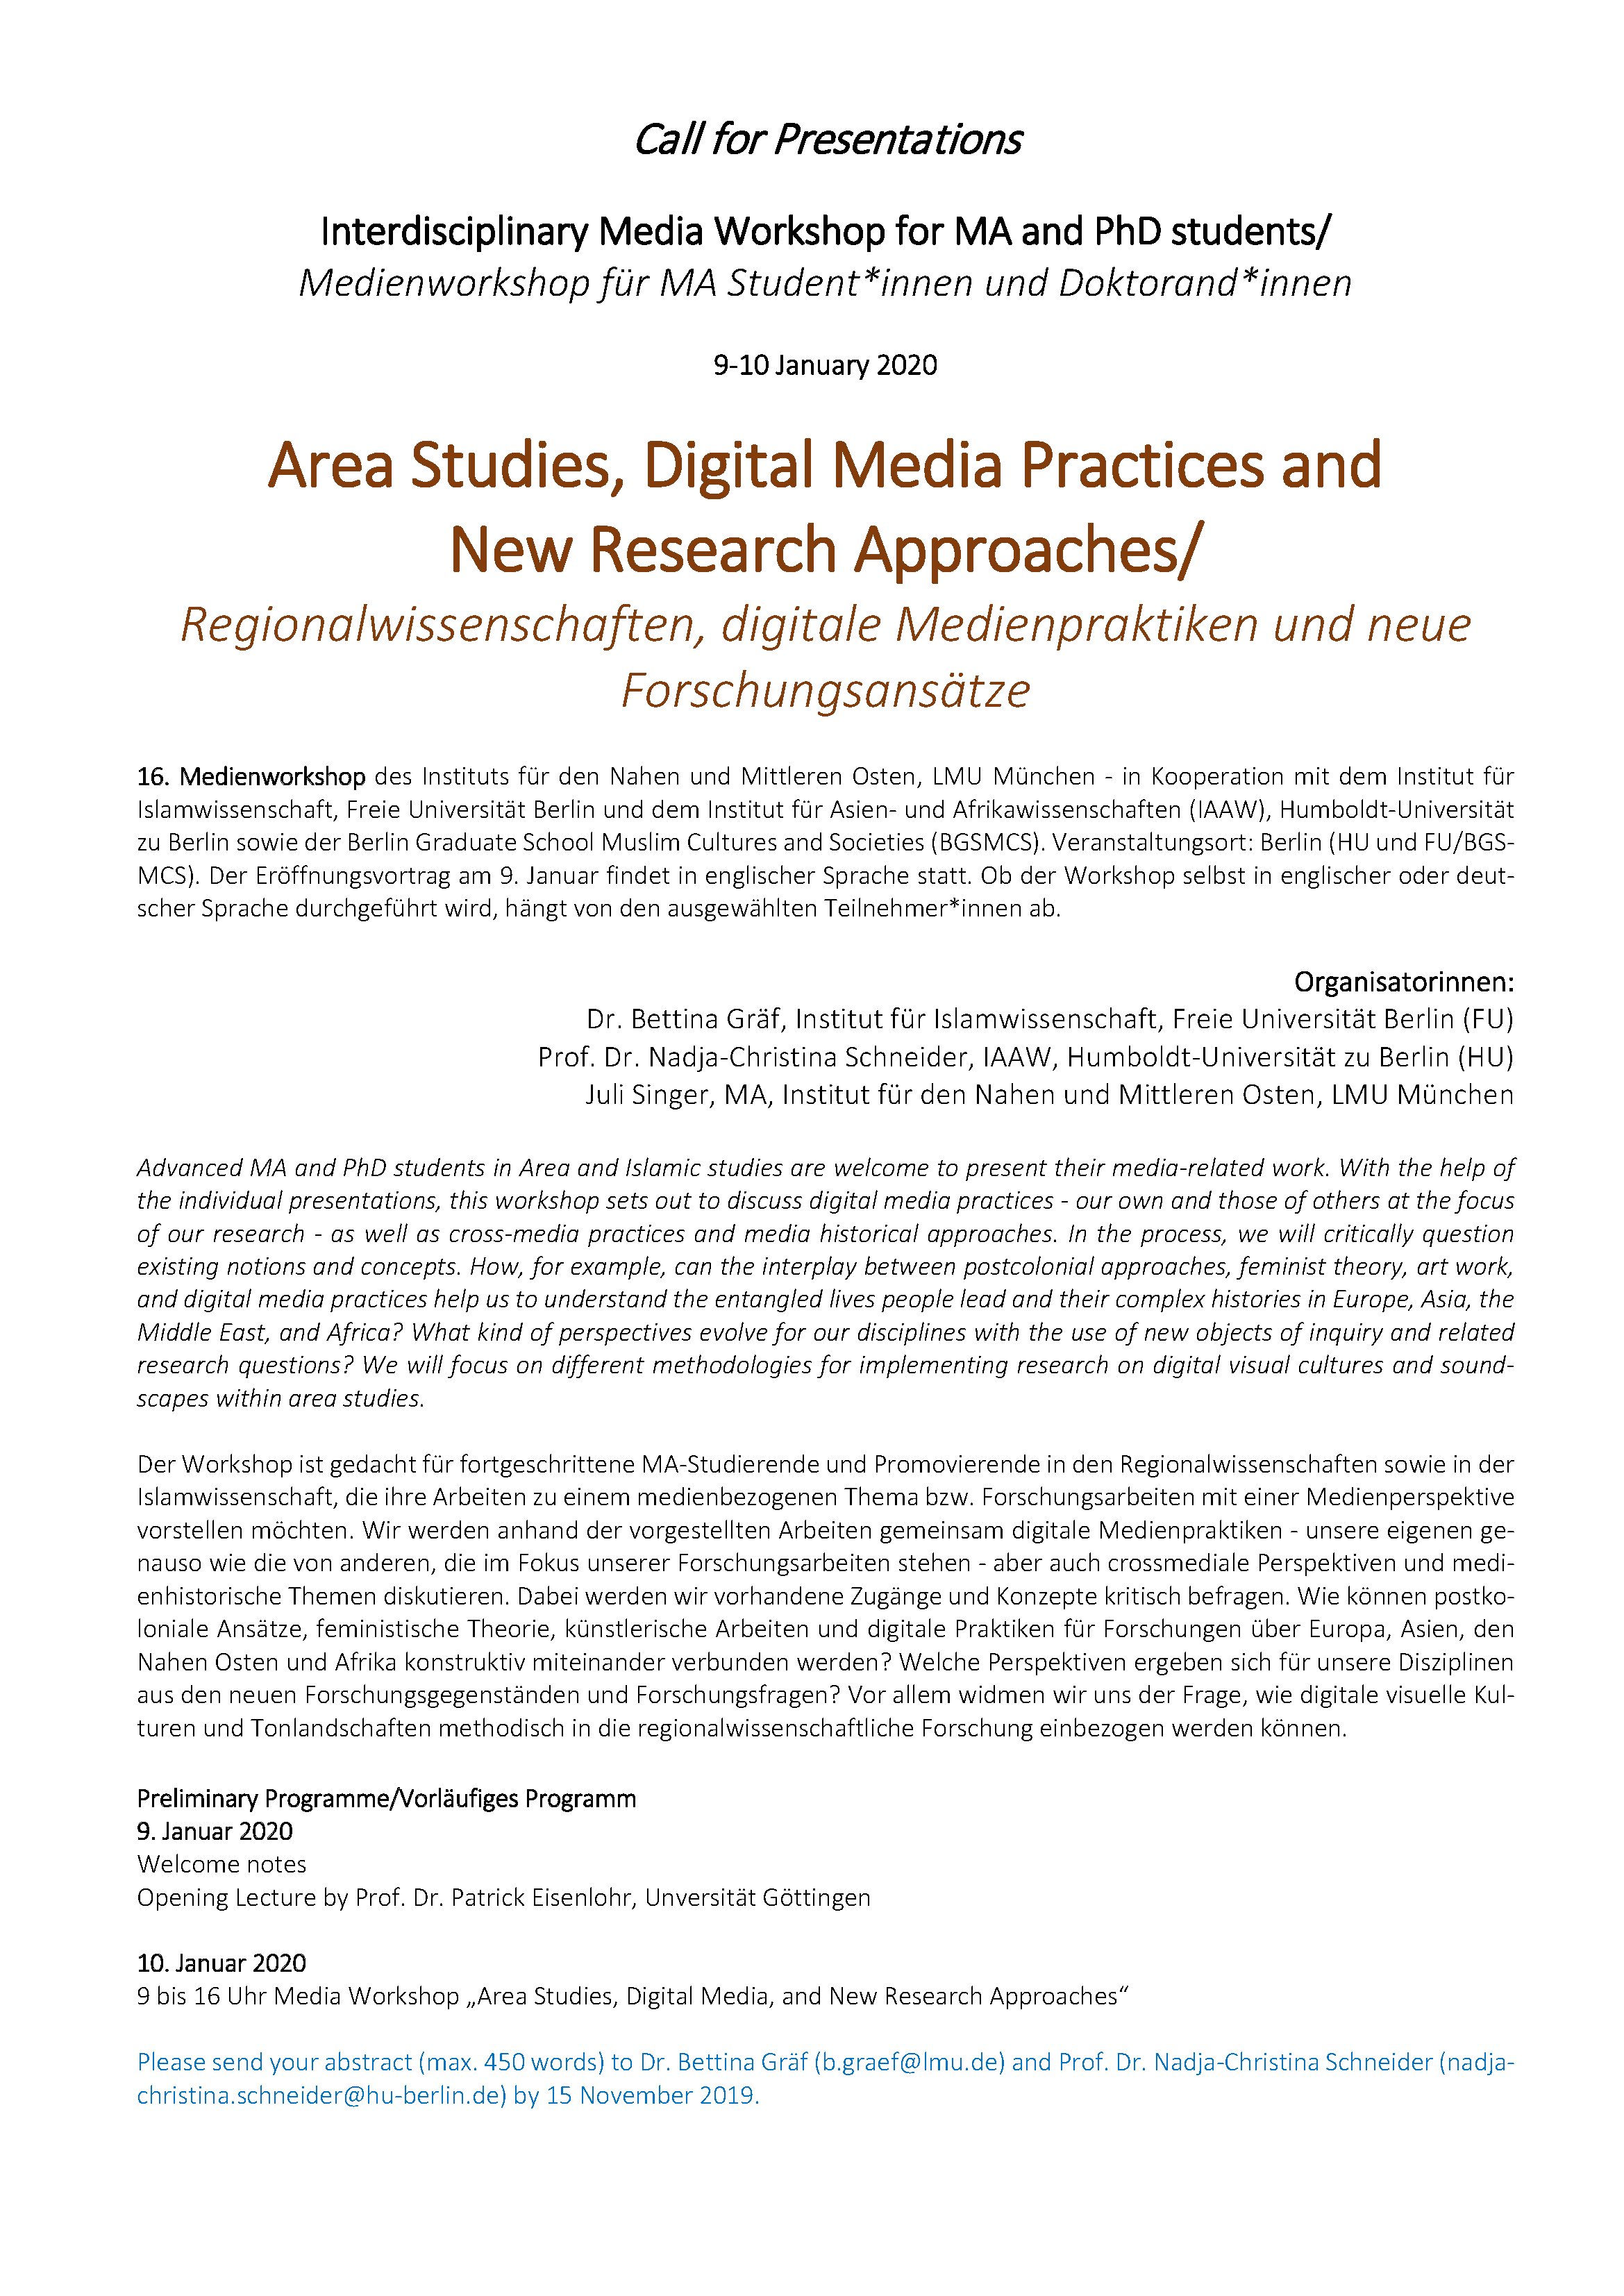 Media workshop for MA and PhD students Call for Presentations